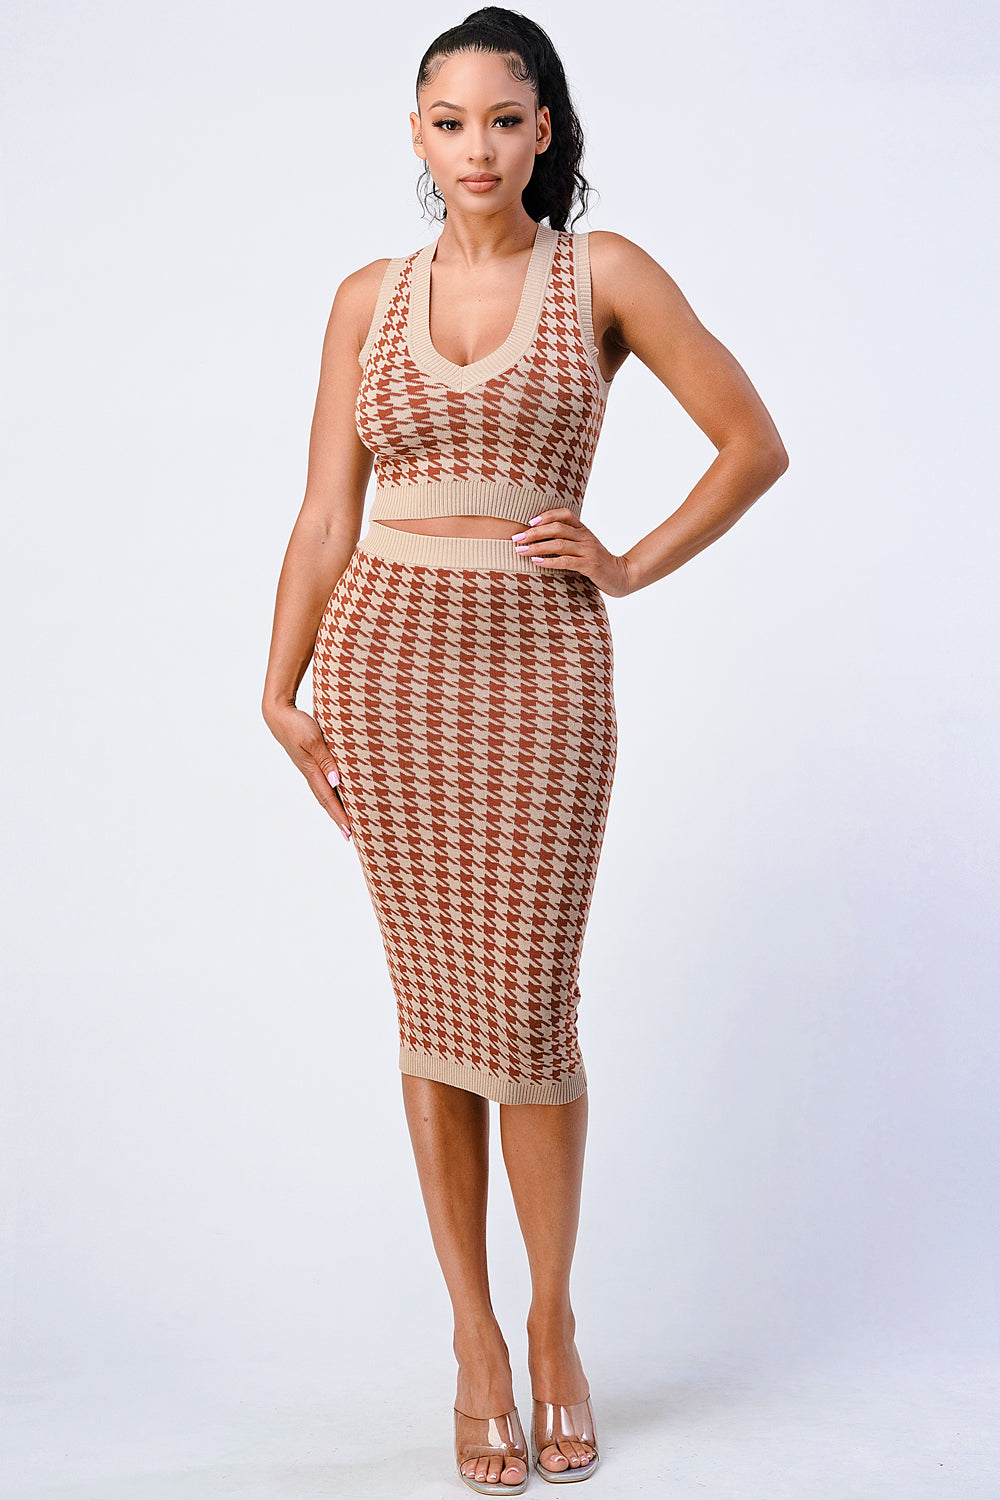 Fancee Luxe Gingham Skirt Sets